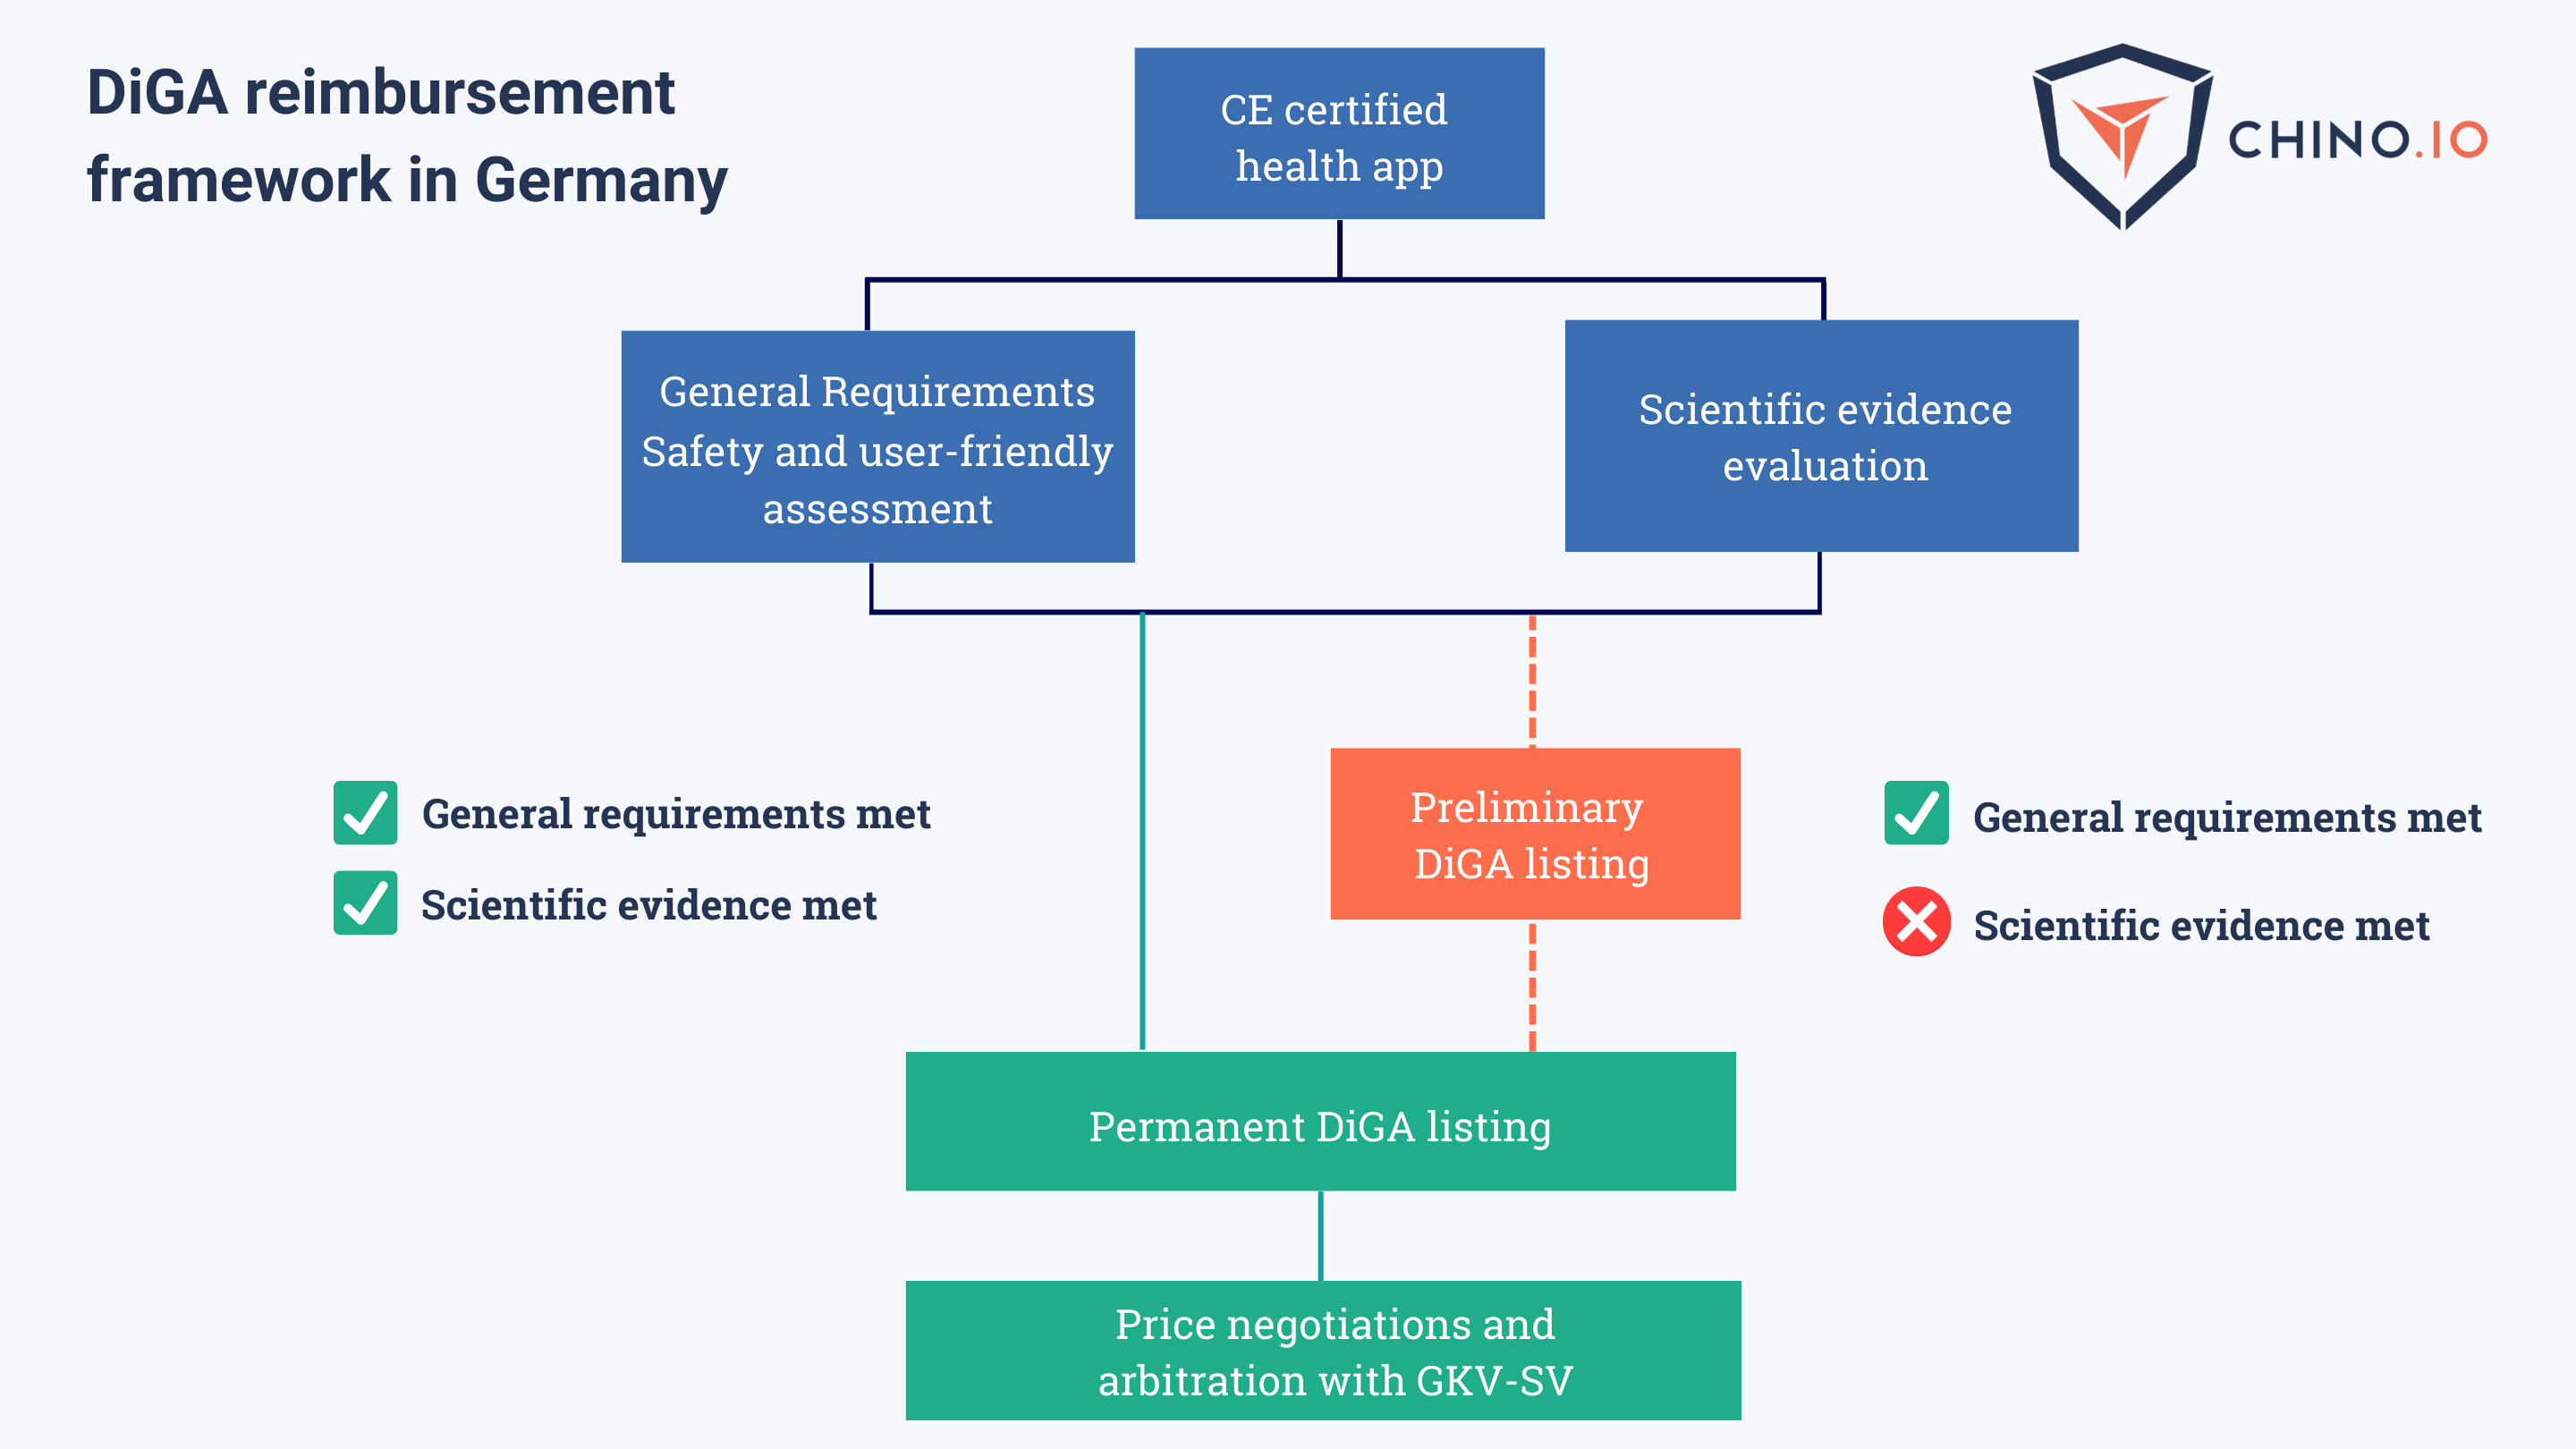 Reimbursement framework in Germany for DiGA that applies to the DVG